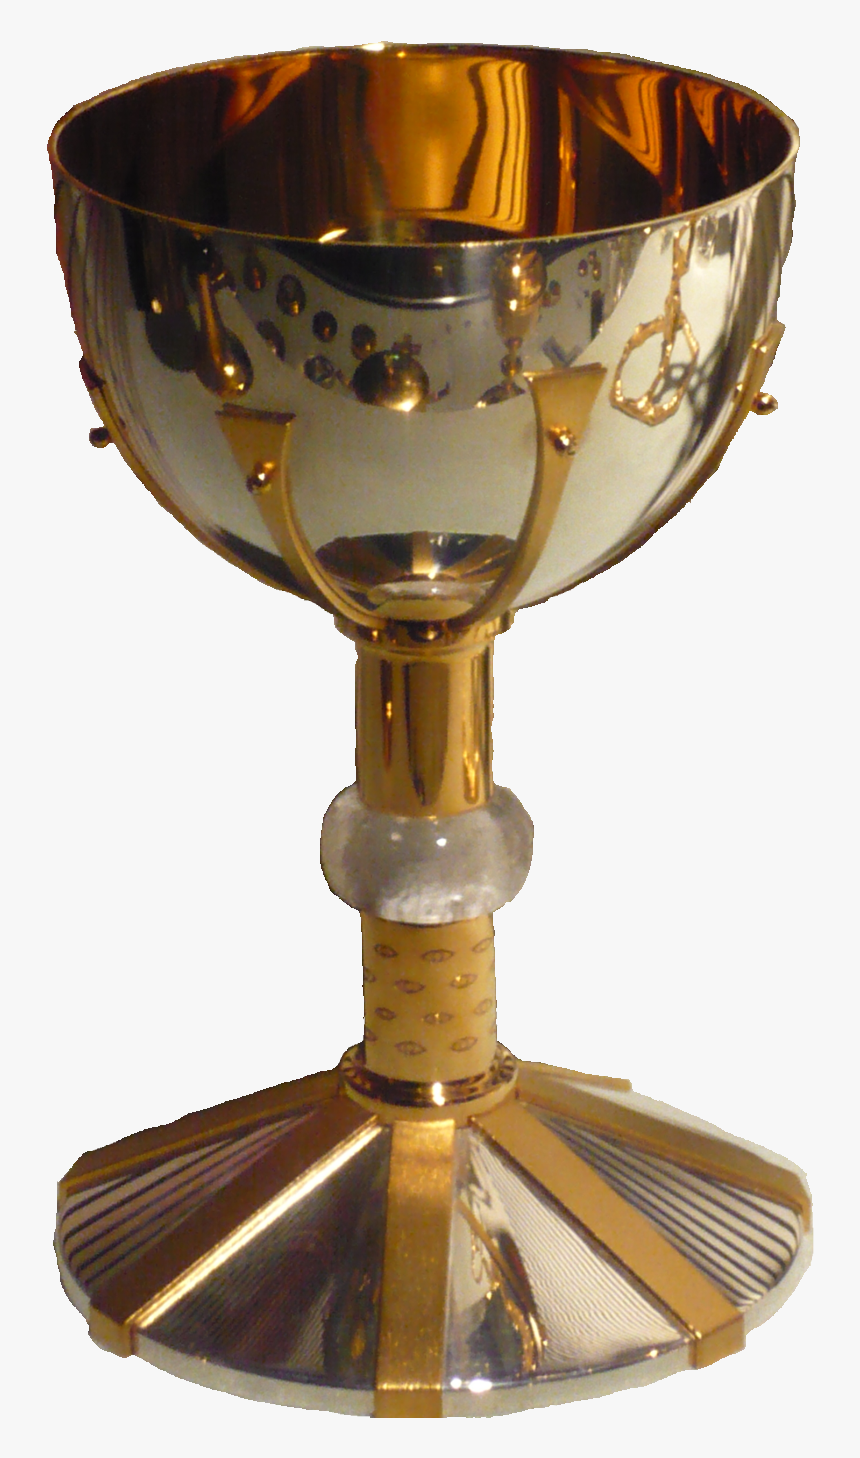 Holy Grail Png, Transparent Png, Free Download